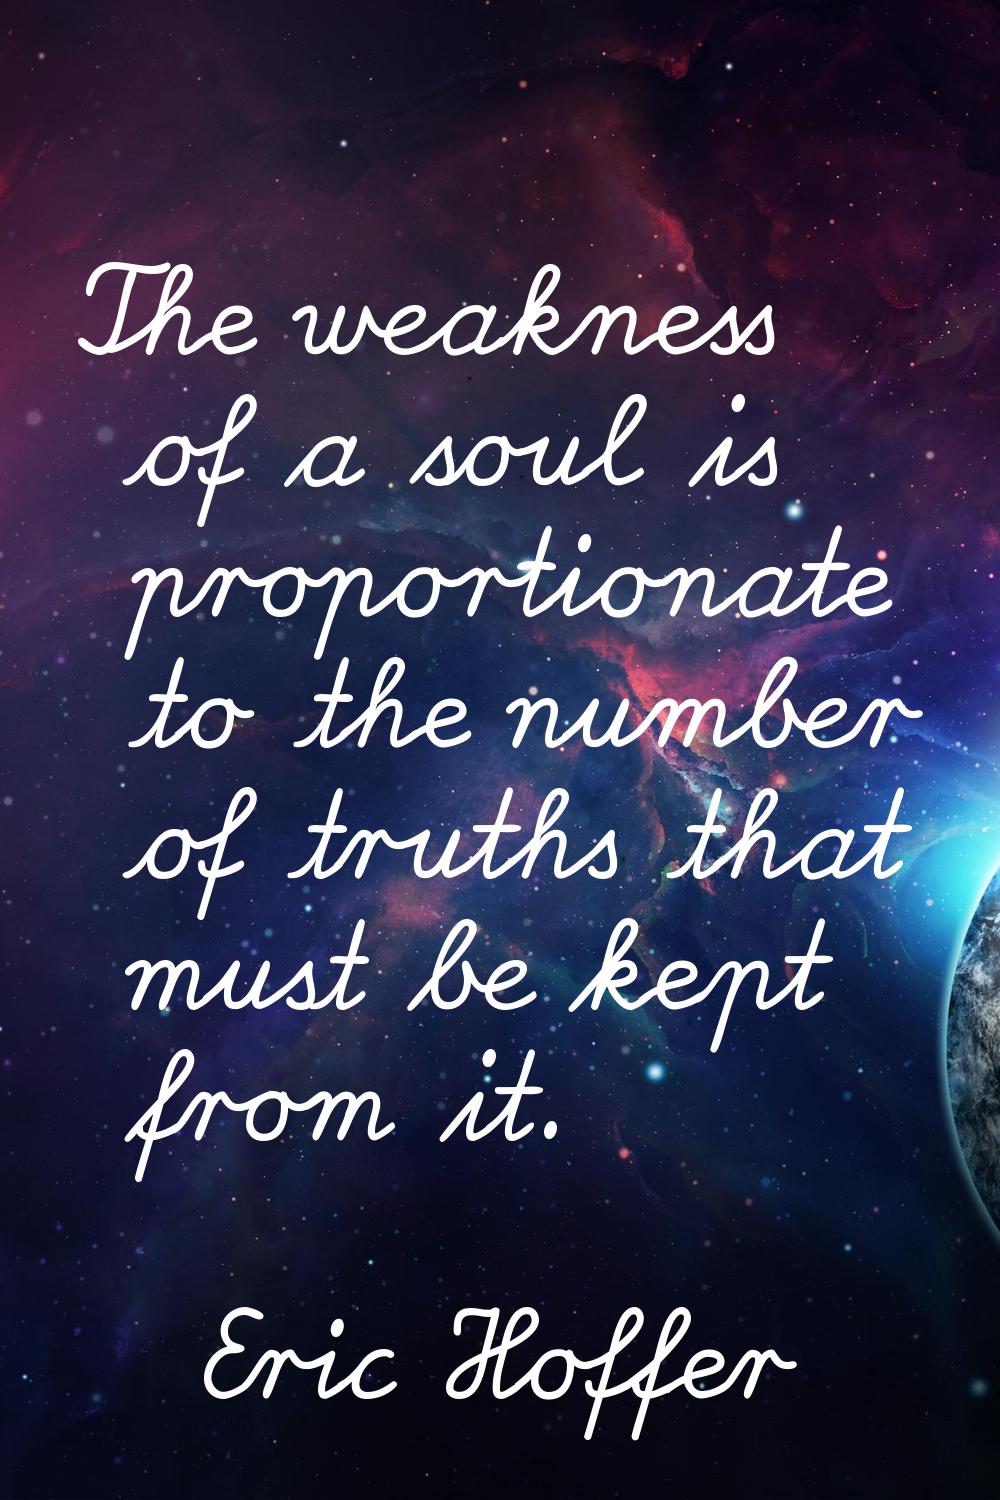 The weakness of a soul is proportionate to the number of truths that must be kept from it.